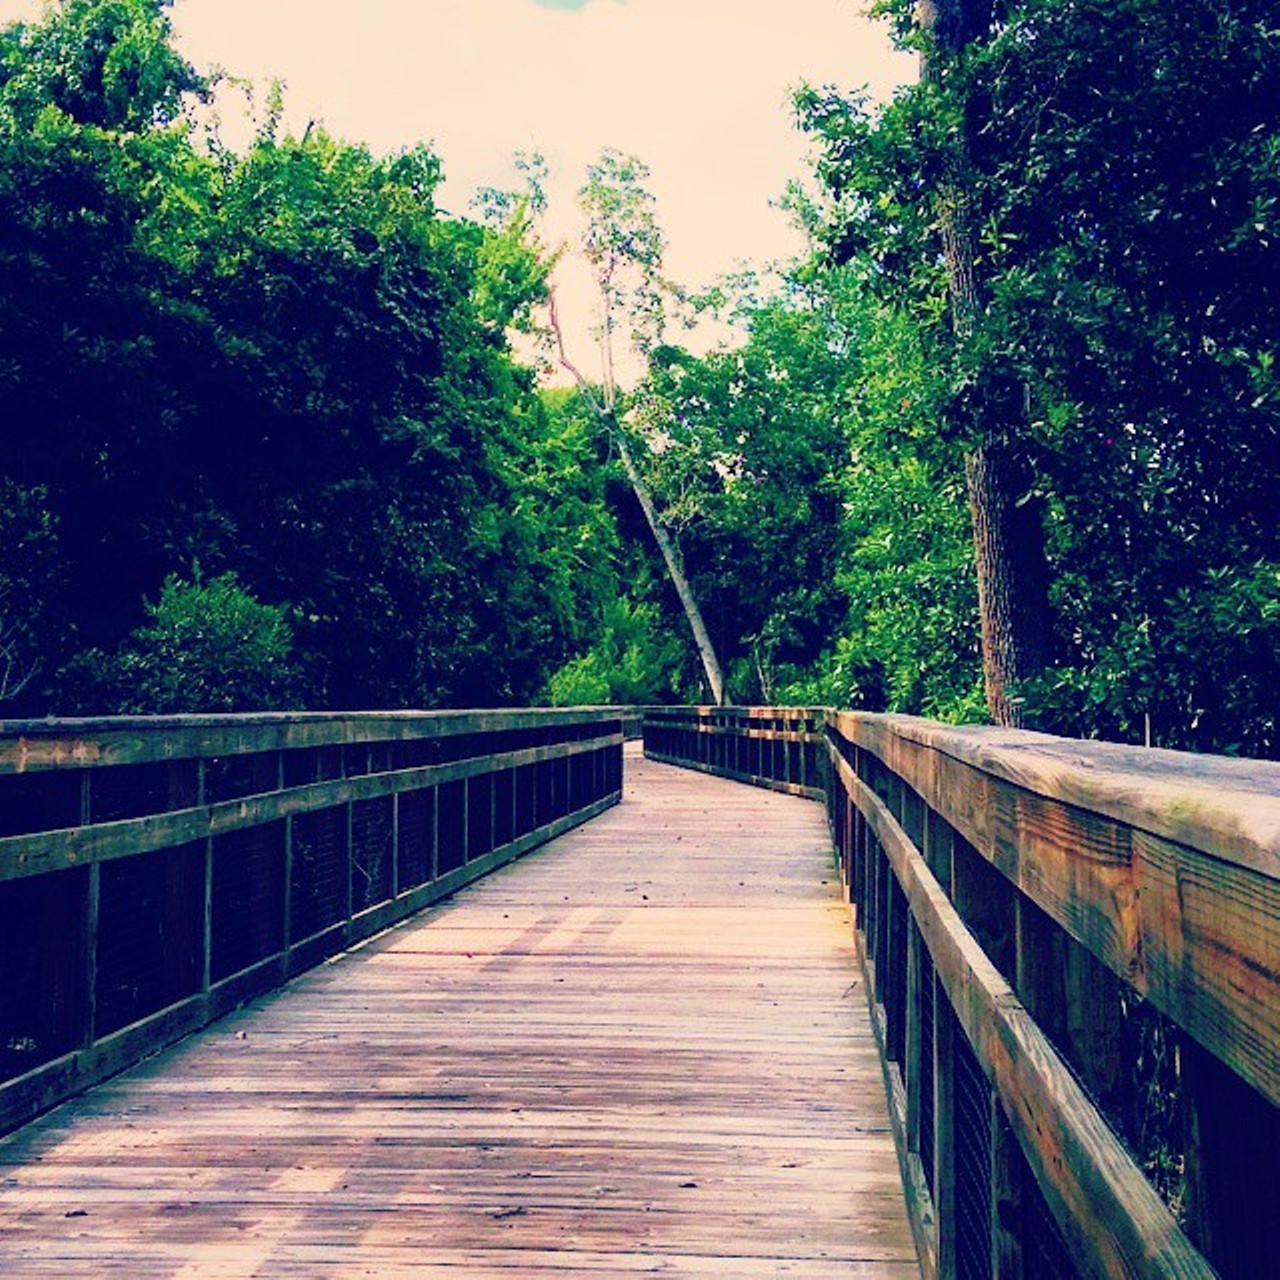 Casselberry Greenway Trail
Formally known as the Wirz trail, the five mile trail connects travelers to four parks, two schools and shopping areas. 
Photo via Deannaisabel/Instagram